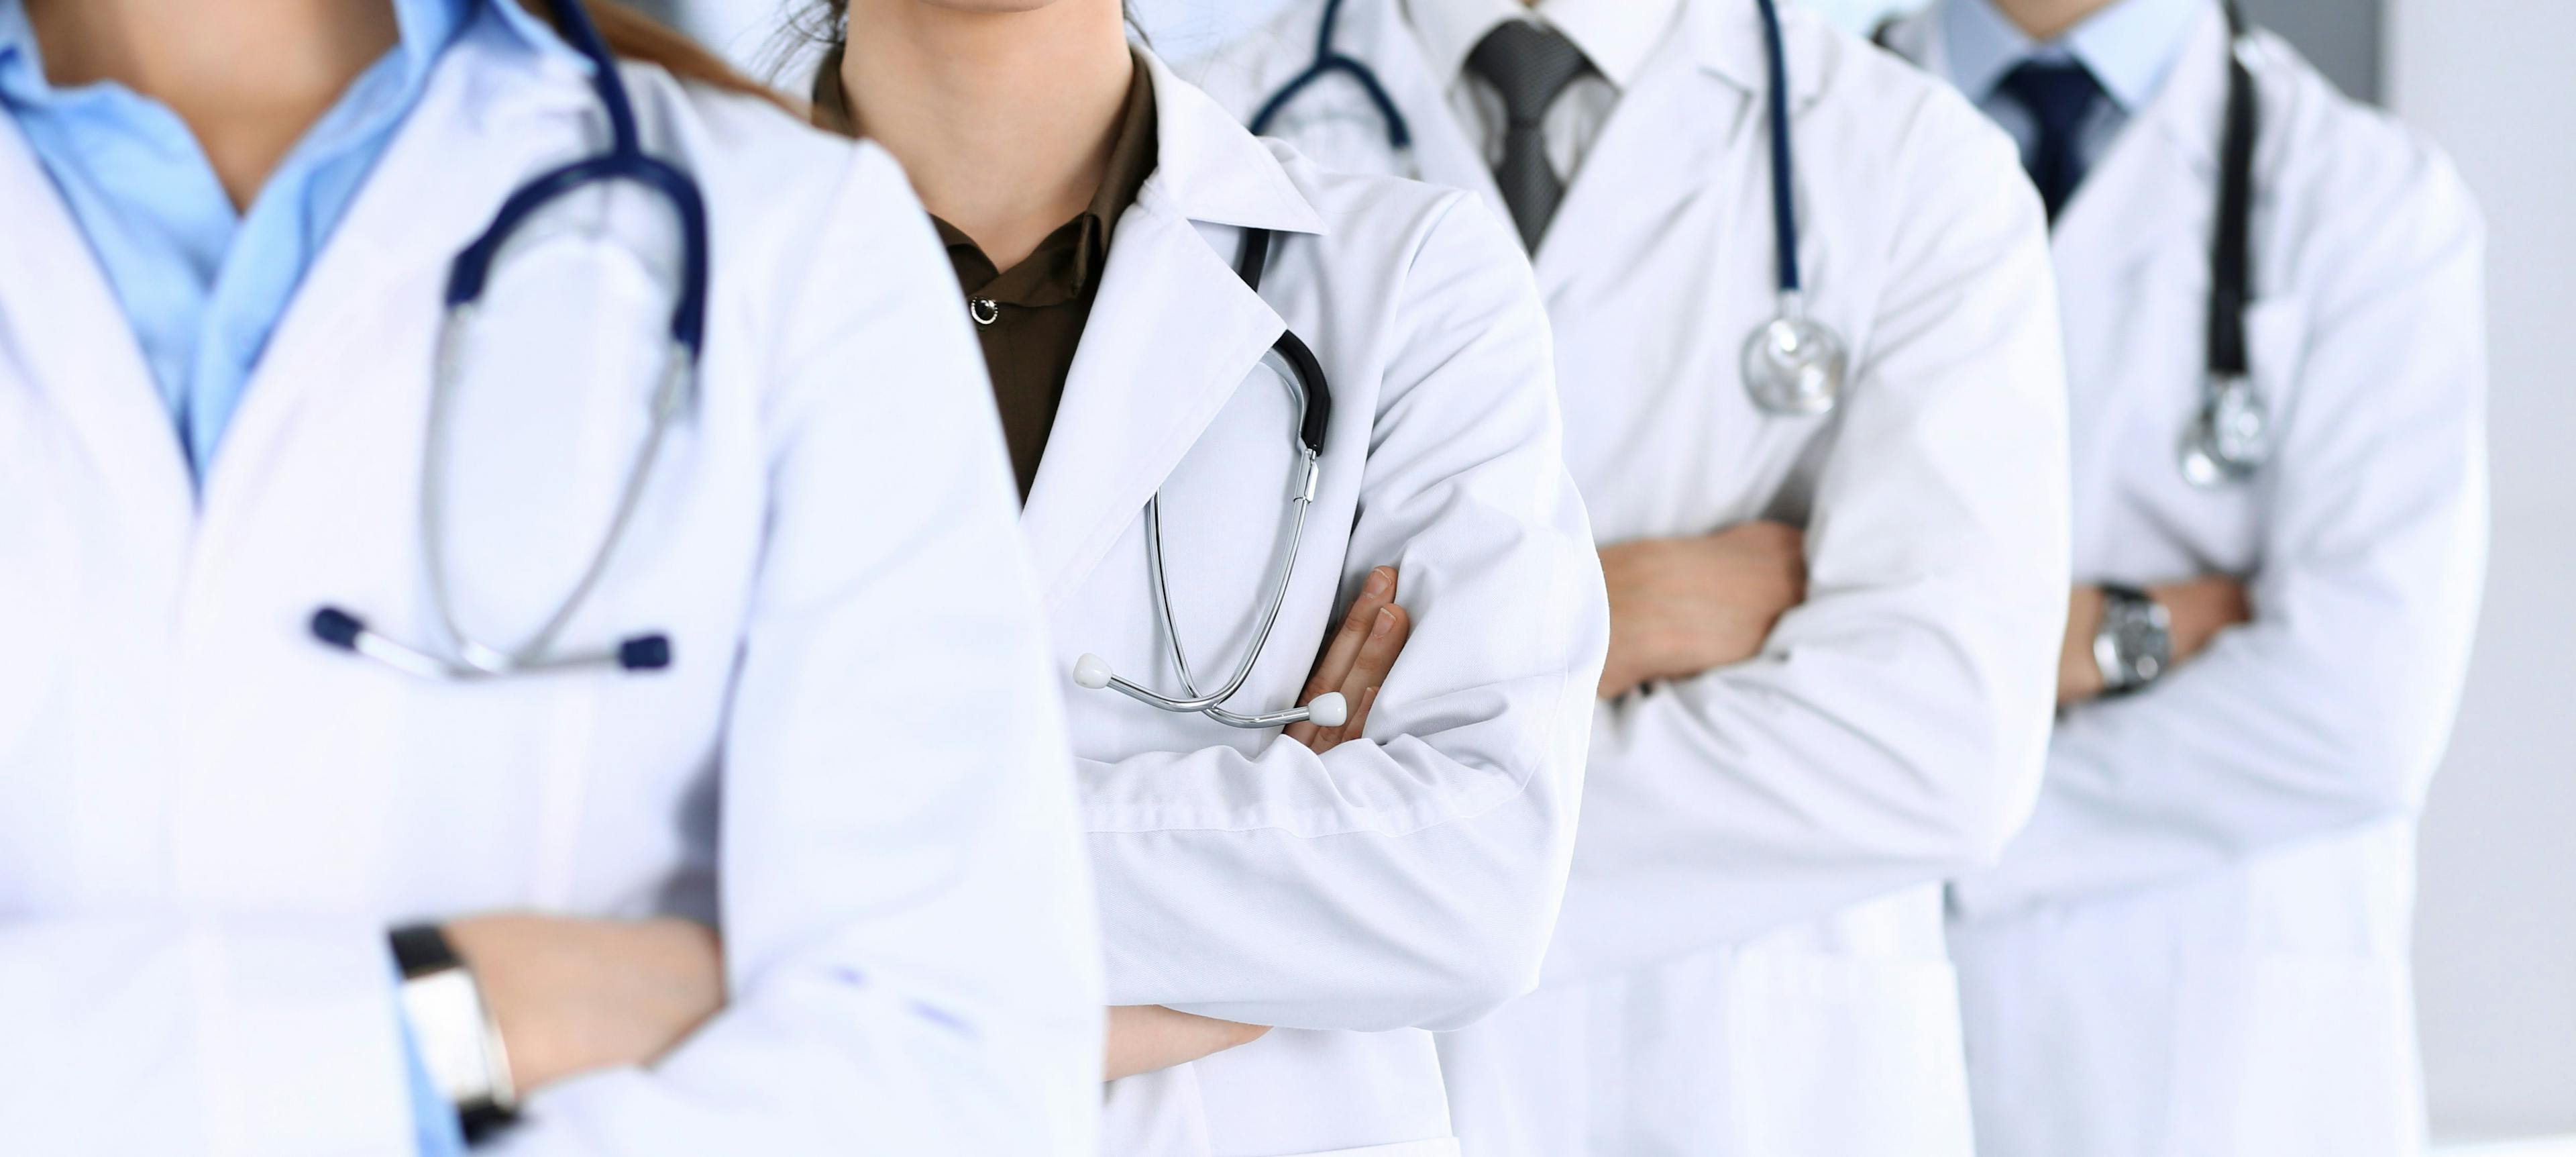 row of doctors standing with arms crossed all in white coats with stethoscopes